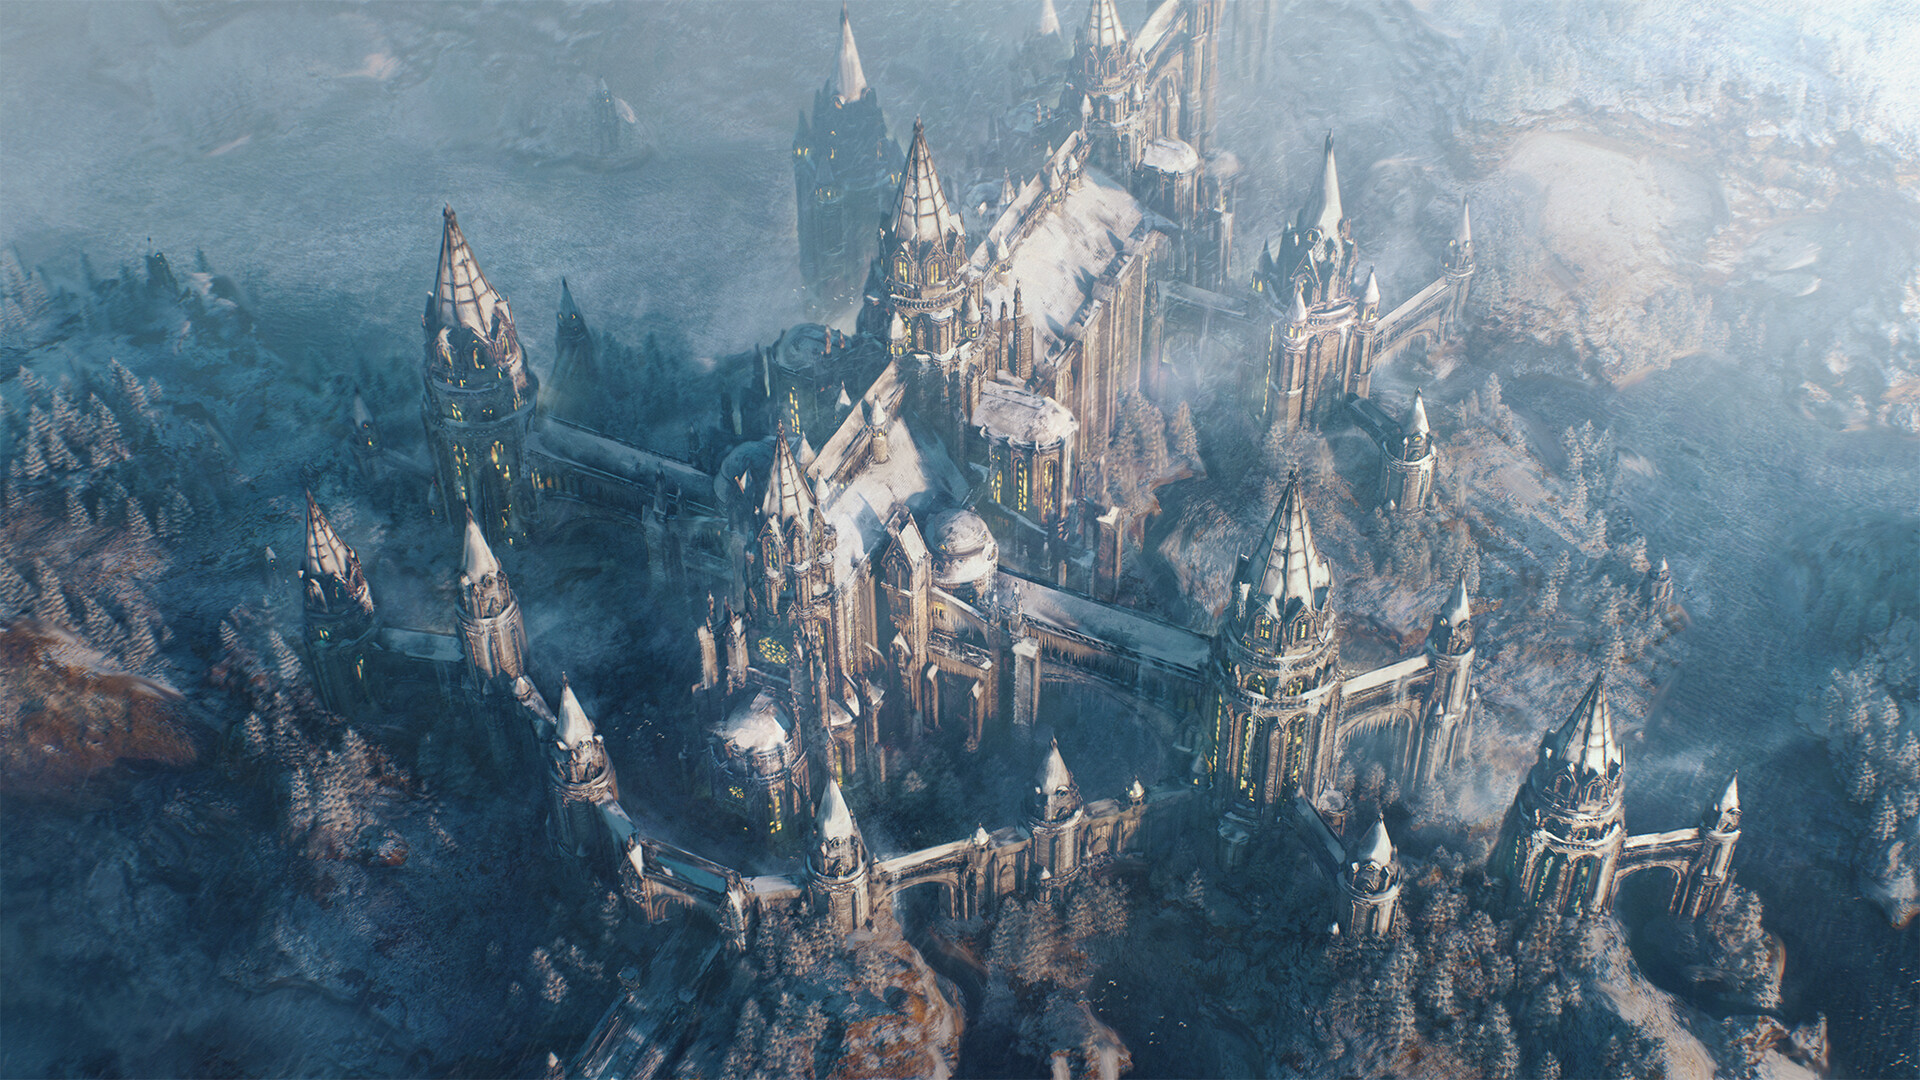 Oliver Beck Digital Art Fantasy Art Castle Snow Trees Western Architecture Gothic Architecture 1920x1080